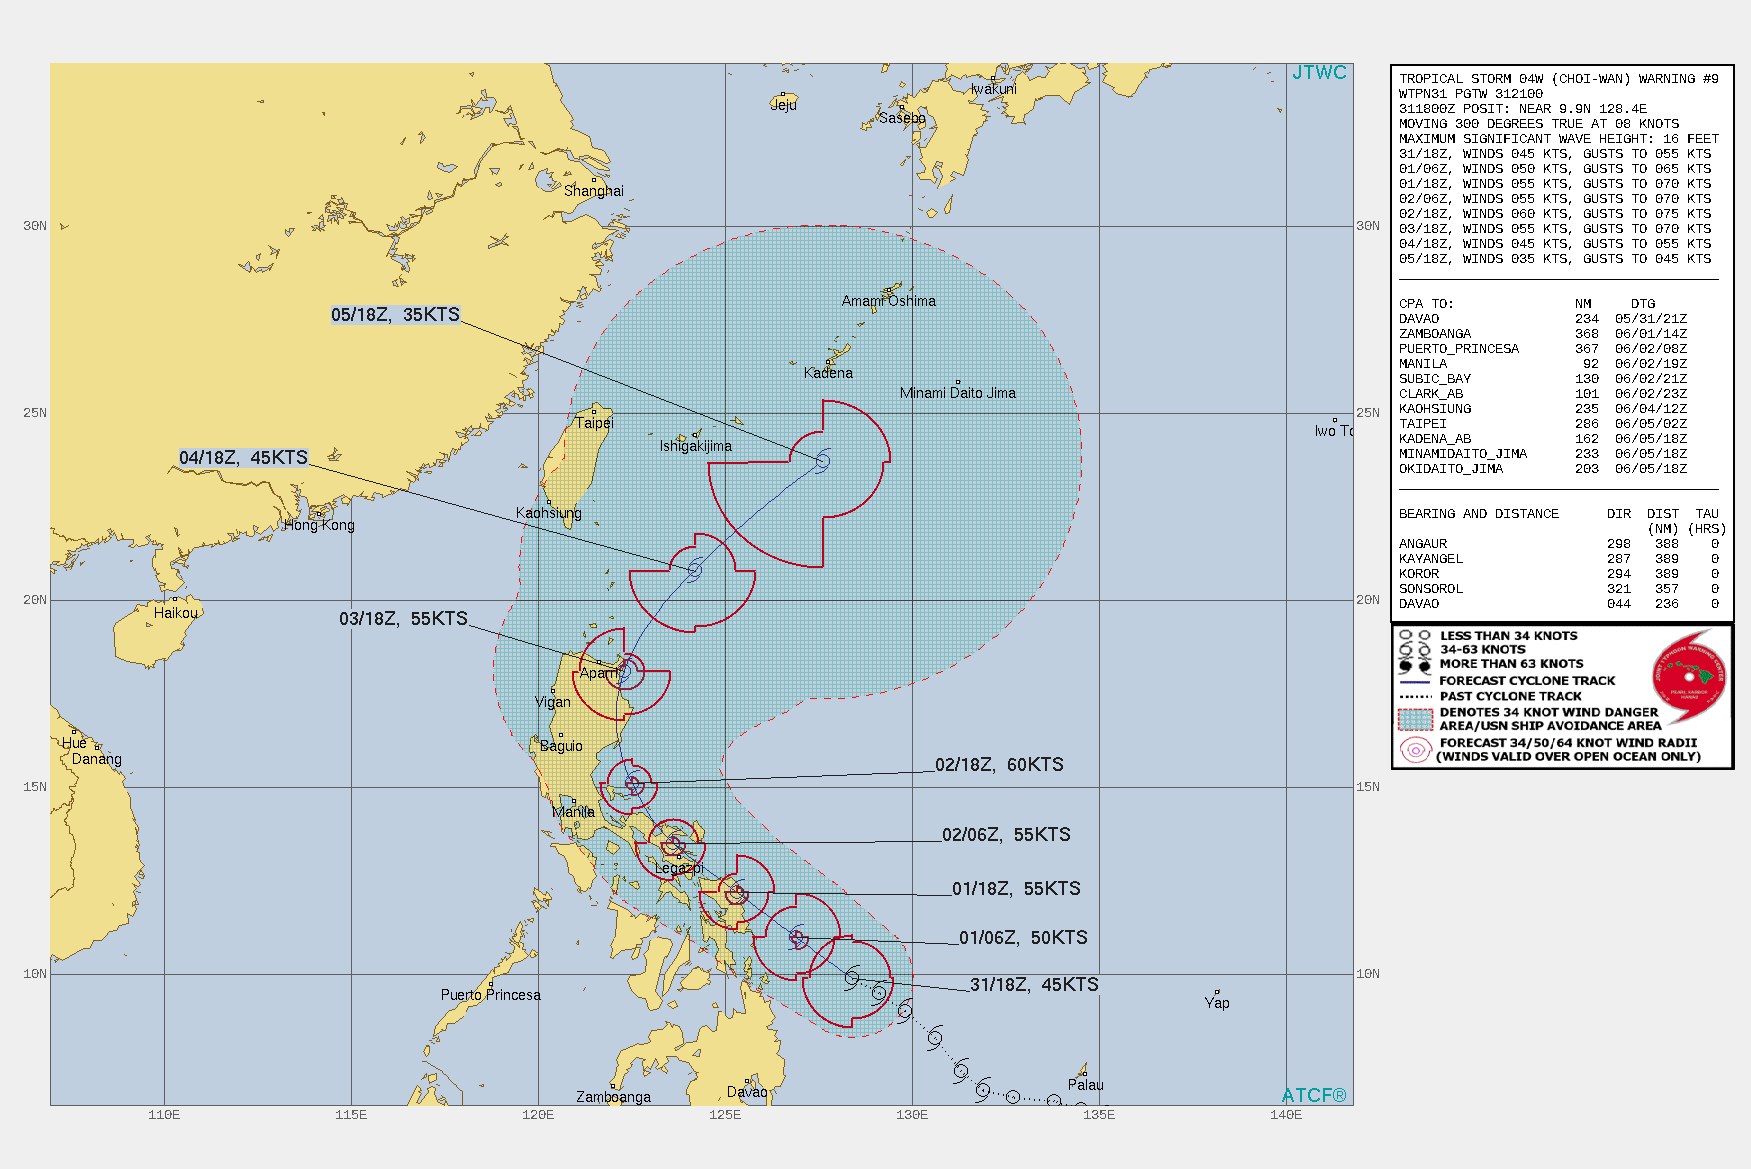 TS 04W. WARNING 9 ISSUED AT 31/21UTC.THE SYSTEM IS LOCATED WITHIN A MARGINALLY-FAVORABLE ENVIRONMENT WITH NORTHEASTERLY  VERTICAL WIND SHEAR (VWS) OFFSET BY GOOD EQUATORWARD OUTFLOW AND  WARM SST VALUES (29-30C). TS 04W IS TRACKING WEST-NORTHWESTWARD  UNDER THE STEERING INFLUENCE OF A DEEP-LAYERED SUBTROPICAL RIDGE  (STR) POSITIONED TO THE NORTH AND NORTHEAST.TS 04W IS FORECAST TO TRACK ALONG THE EASTERN COAST OF THE  PHILIPPINES WHILE SLOWLY INTENSIFYING TO A PEAK OF 60 KNOTS BY   48H. AFTER 72H, THE WESTERN PORTIONS OF THE STR WILL  CONTINUE TO ERODE ALLOWING THE SYSTEM TO RECURVE NORTHEASTWARD. TS  04W WILL WEAKEN AS IT ENCOUNTERS INCREASING VWS ASSOCIATED WITH A  MIDLATITUDE SHORTWAVE TROUGH EXPECTED TO DIG OVER THE EAST CHINA  SEA. TS 04W IS EXPECTED TO BEGIN EXTRA-TROPICAL TRANSITION (ETT)  NEAR 120H BUT MAY DISSIPATE PRIOR TO COMPLETING ETT.